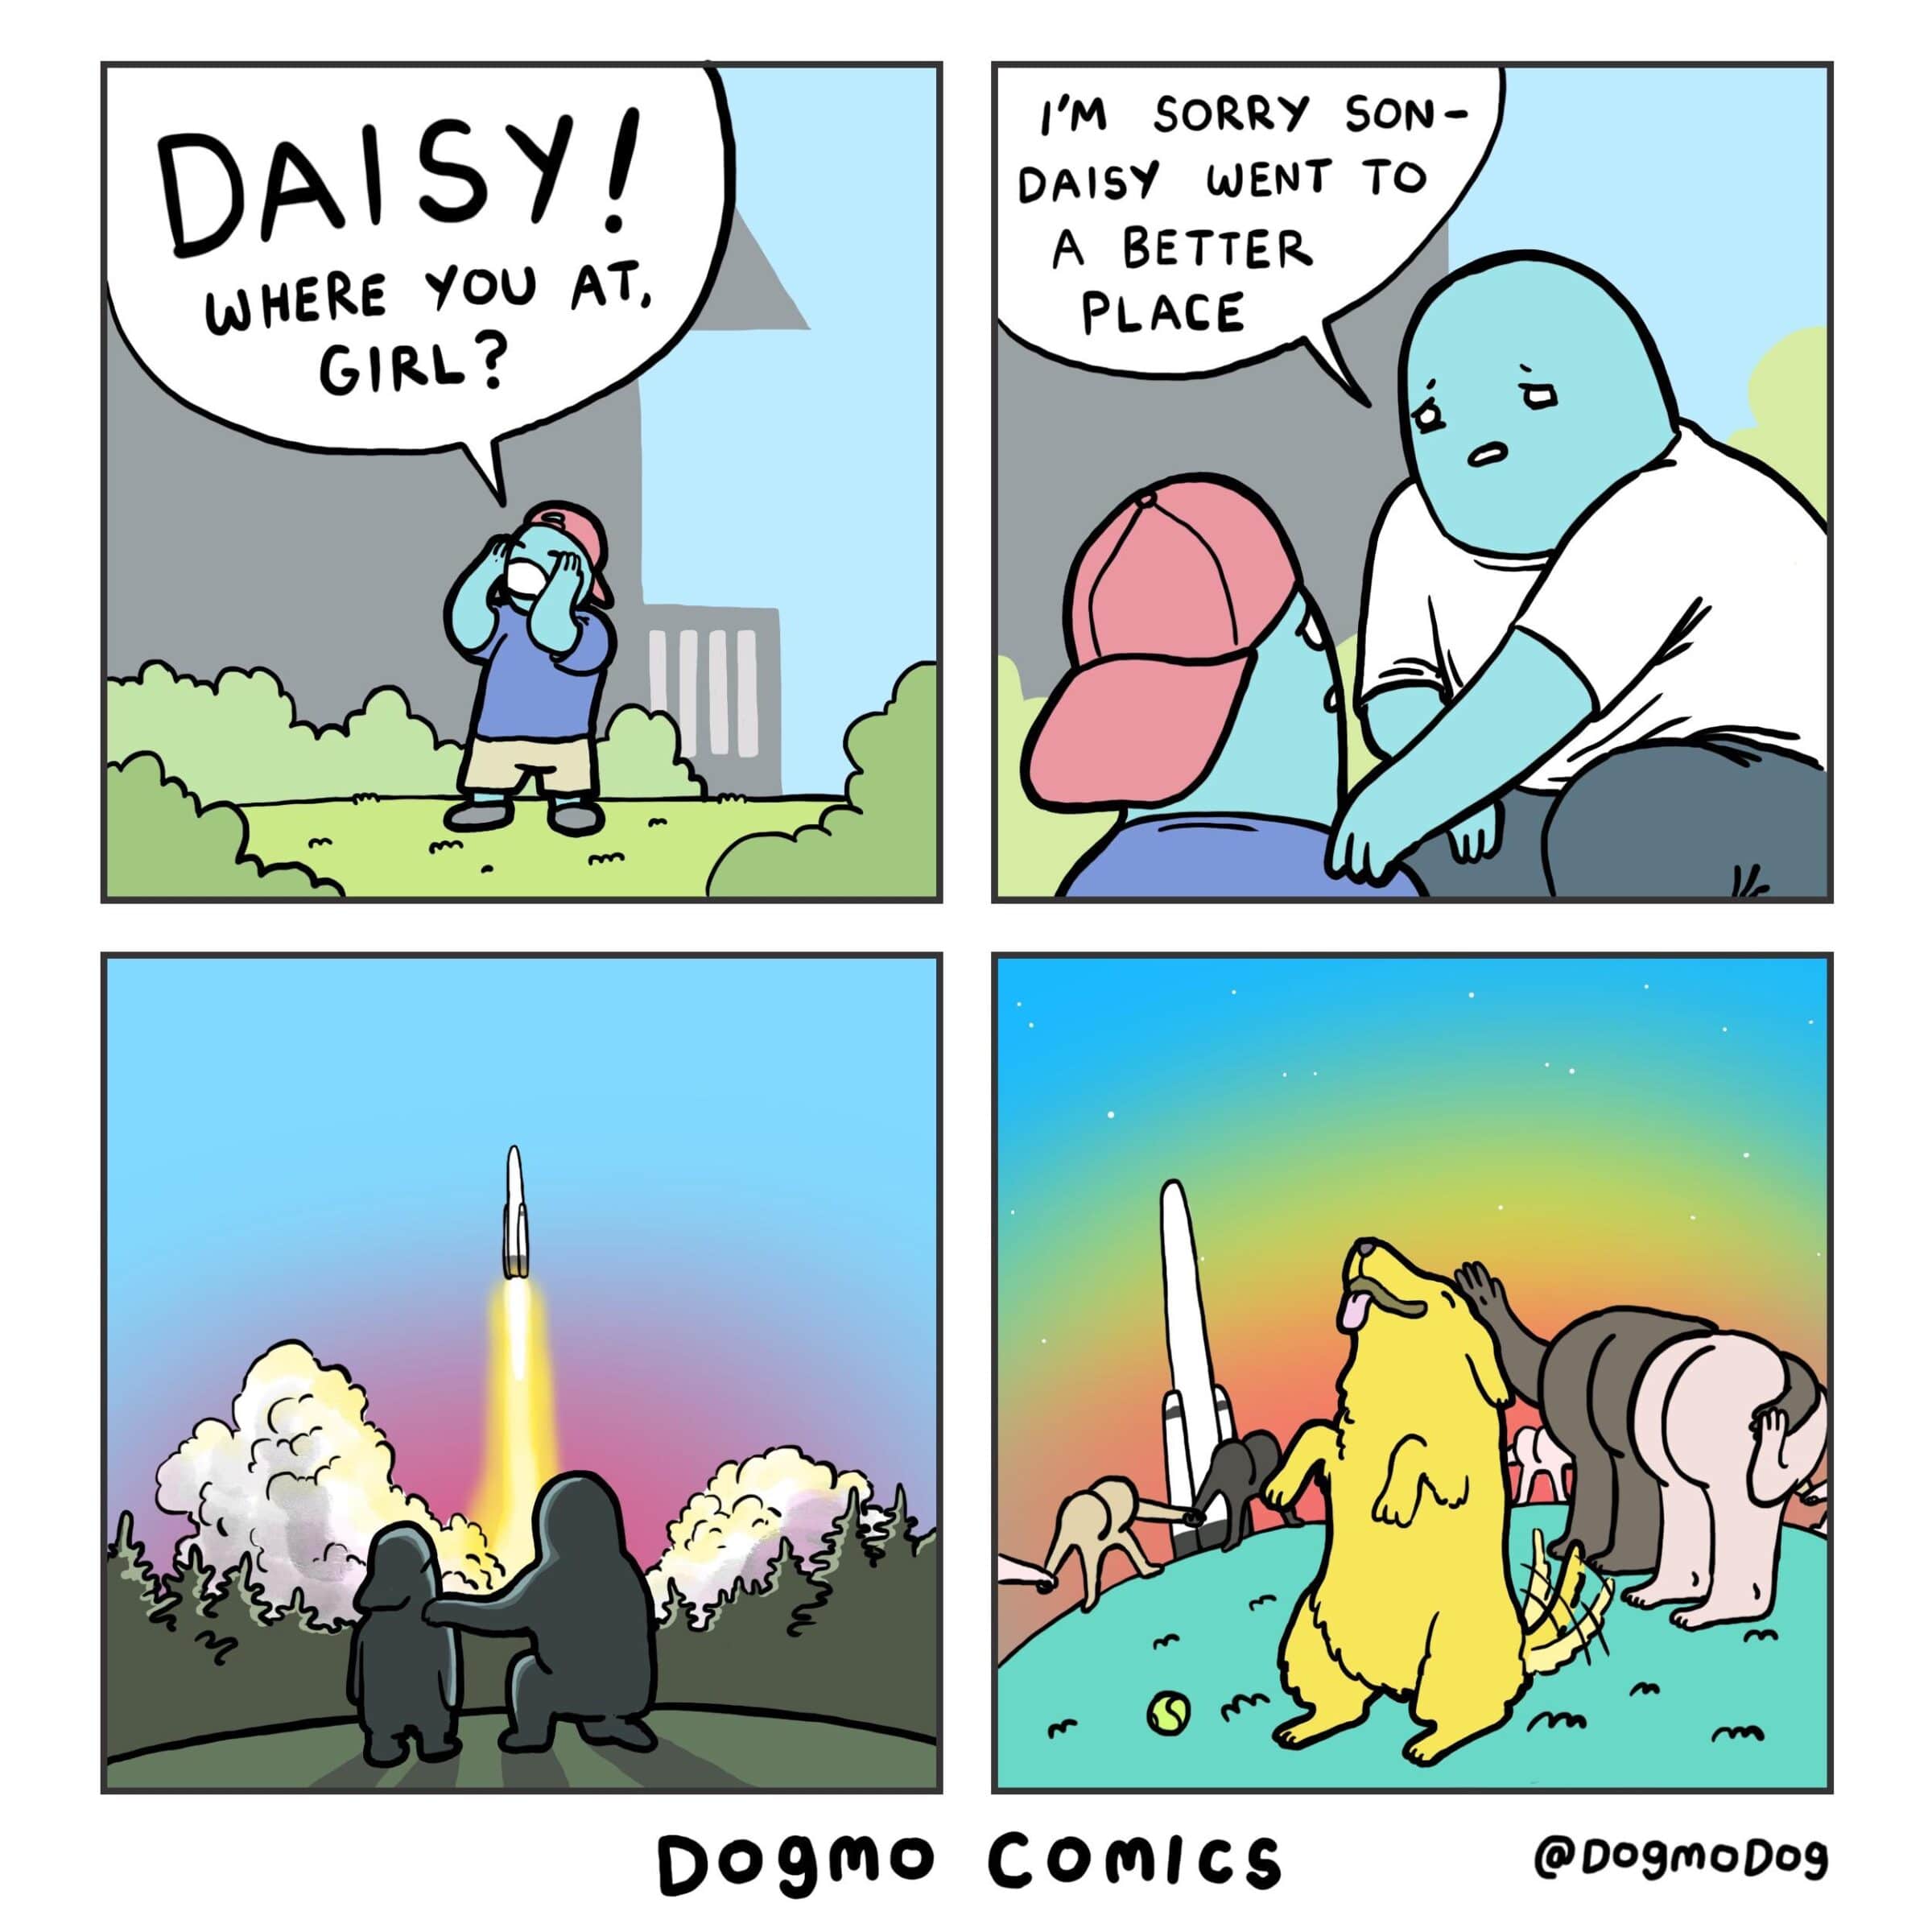 A better place, Better Place Comics A better place, Better Place text: WHERE You AT, Dogmo I'm SORRY SON- DAISY WENT TO A BETTER PLACE Conics @D09moD09 